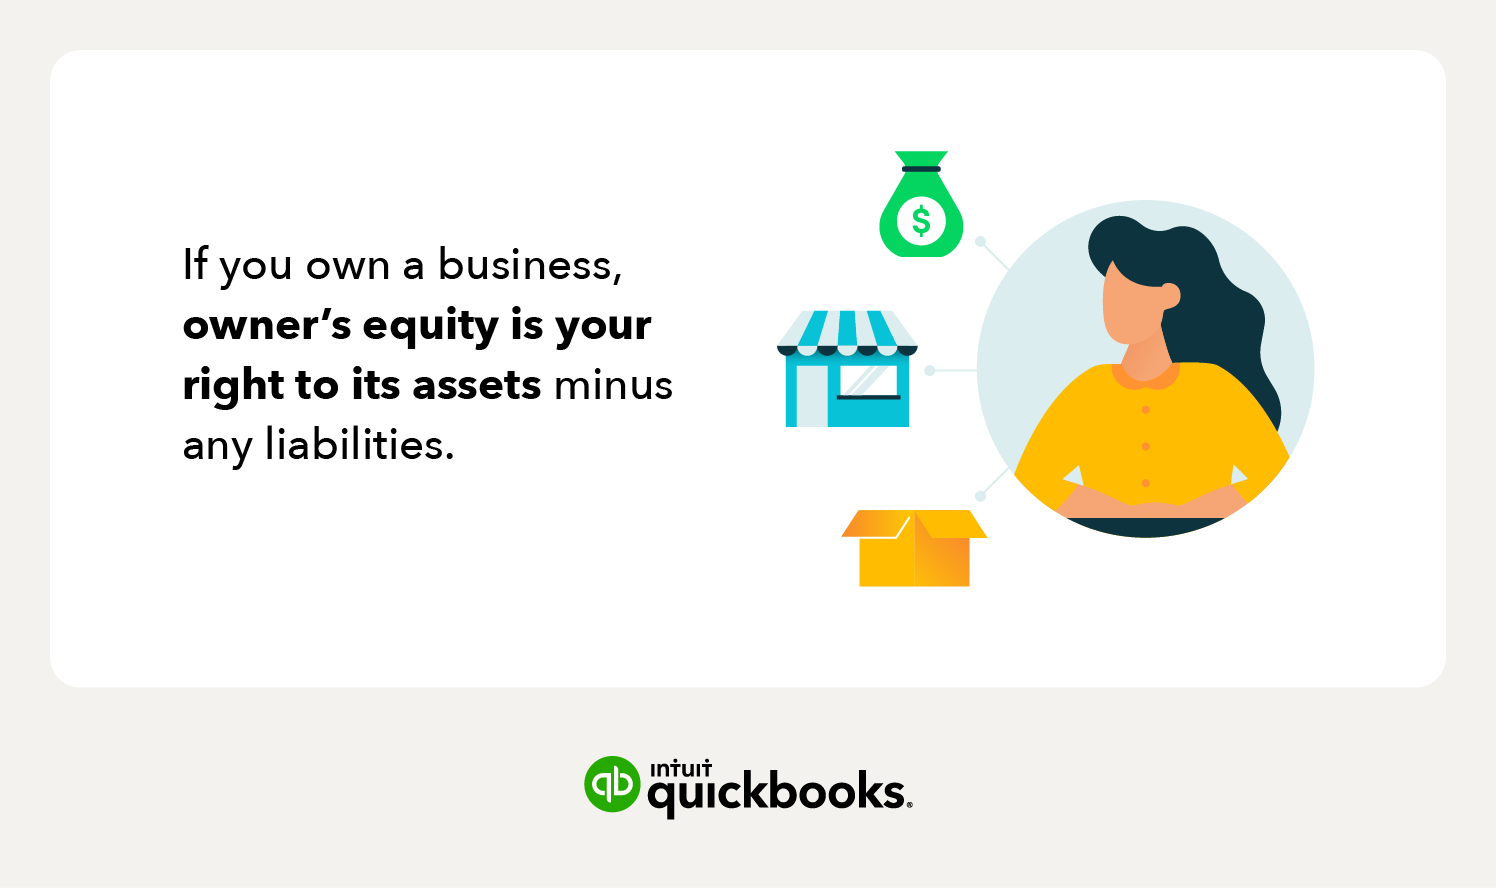 a woman with black hair and an orange shirt looking at a money bag, a business building, and a box with a text definition of owner's equity.